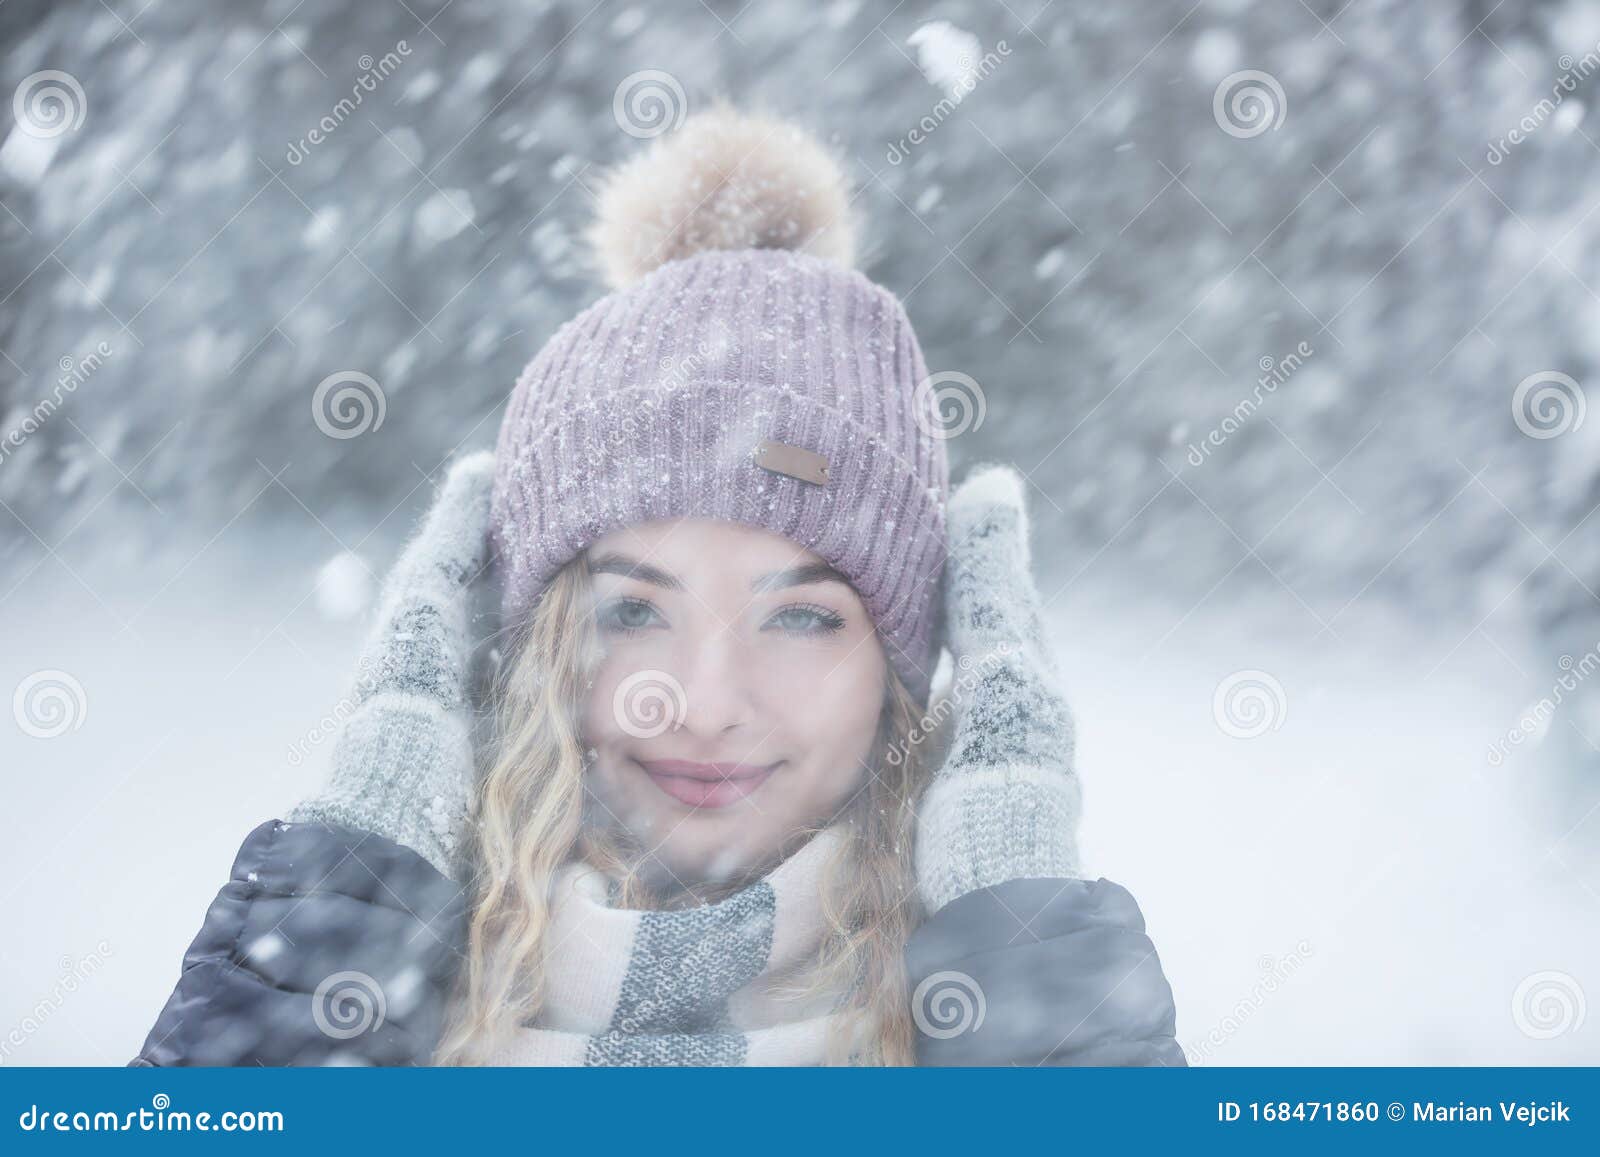 Portrait of Young Beautiful Woman in Winter Clothes and Strong Snowing ...